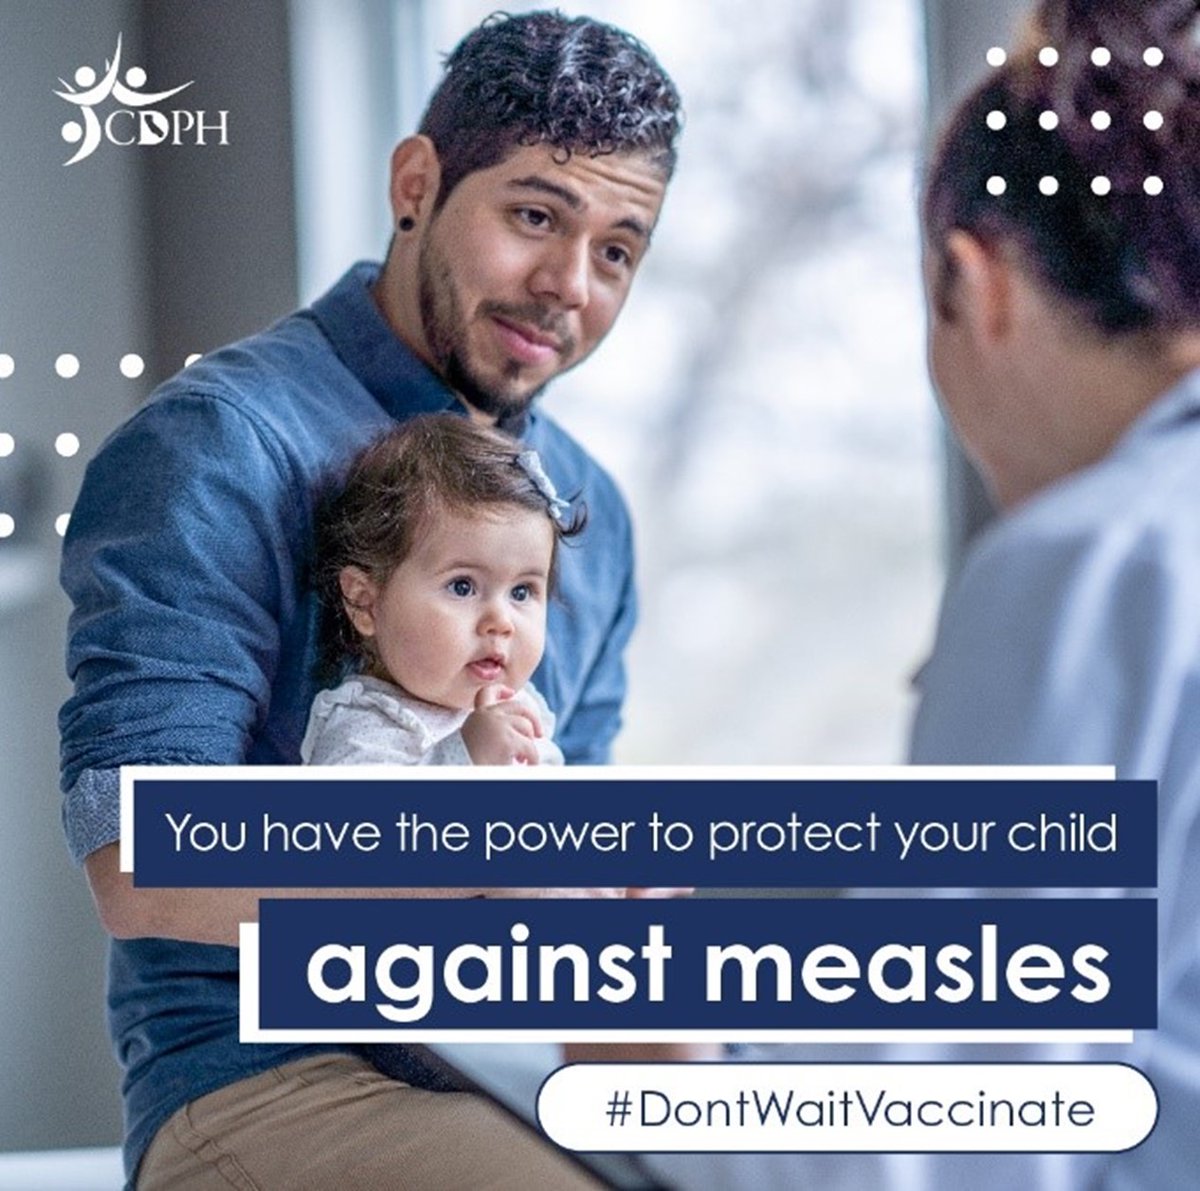 Measles is a very contagious disease caused by a virus. It spreads through the air when an infected person coughs or sneezes. Measles starts with a cough, runny nose, red eyes, & fever. Then a rash of red spots breaks out. Talk to a health care provider. cdph.ca.gov/Programs/CID/D…